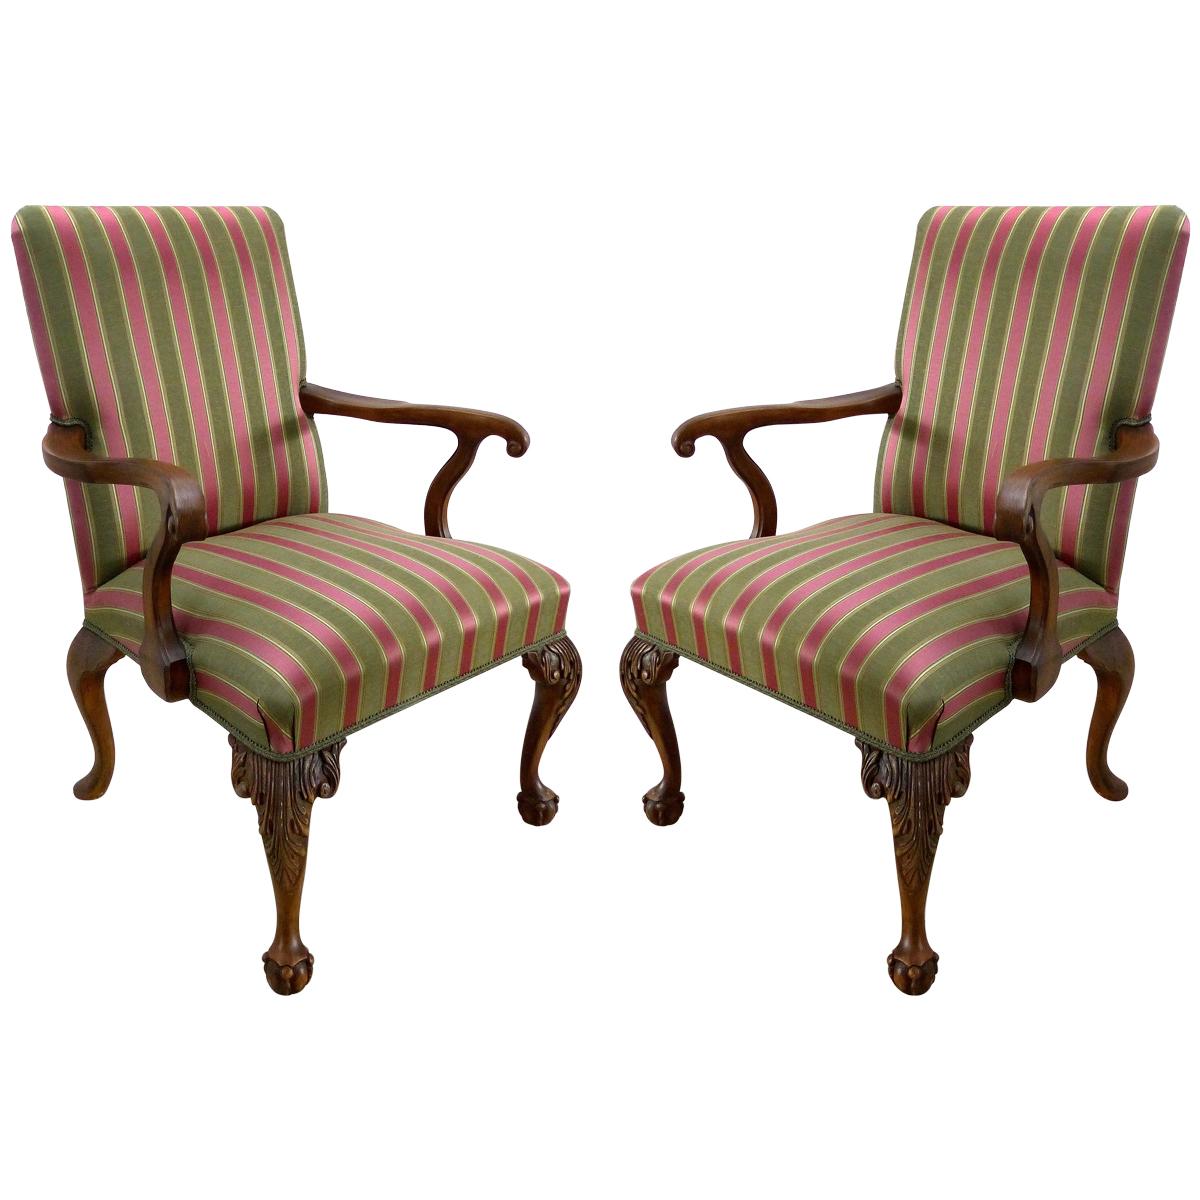 Angelo Cappellini Chippendale Style Armchairs, pair